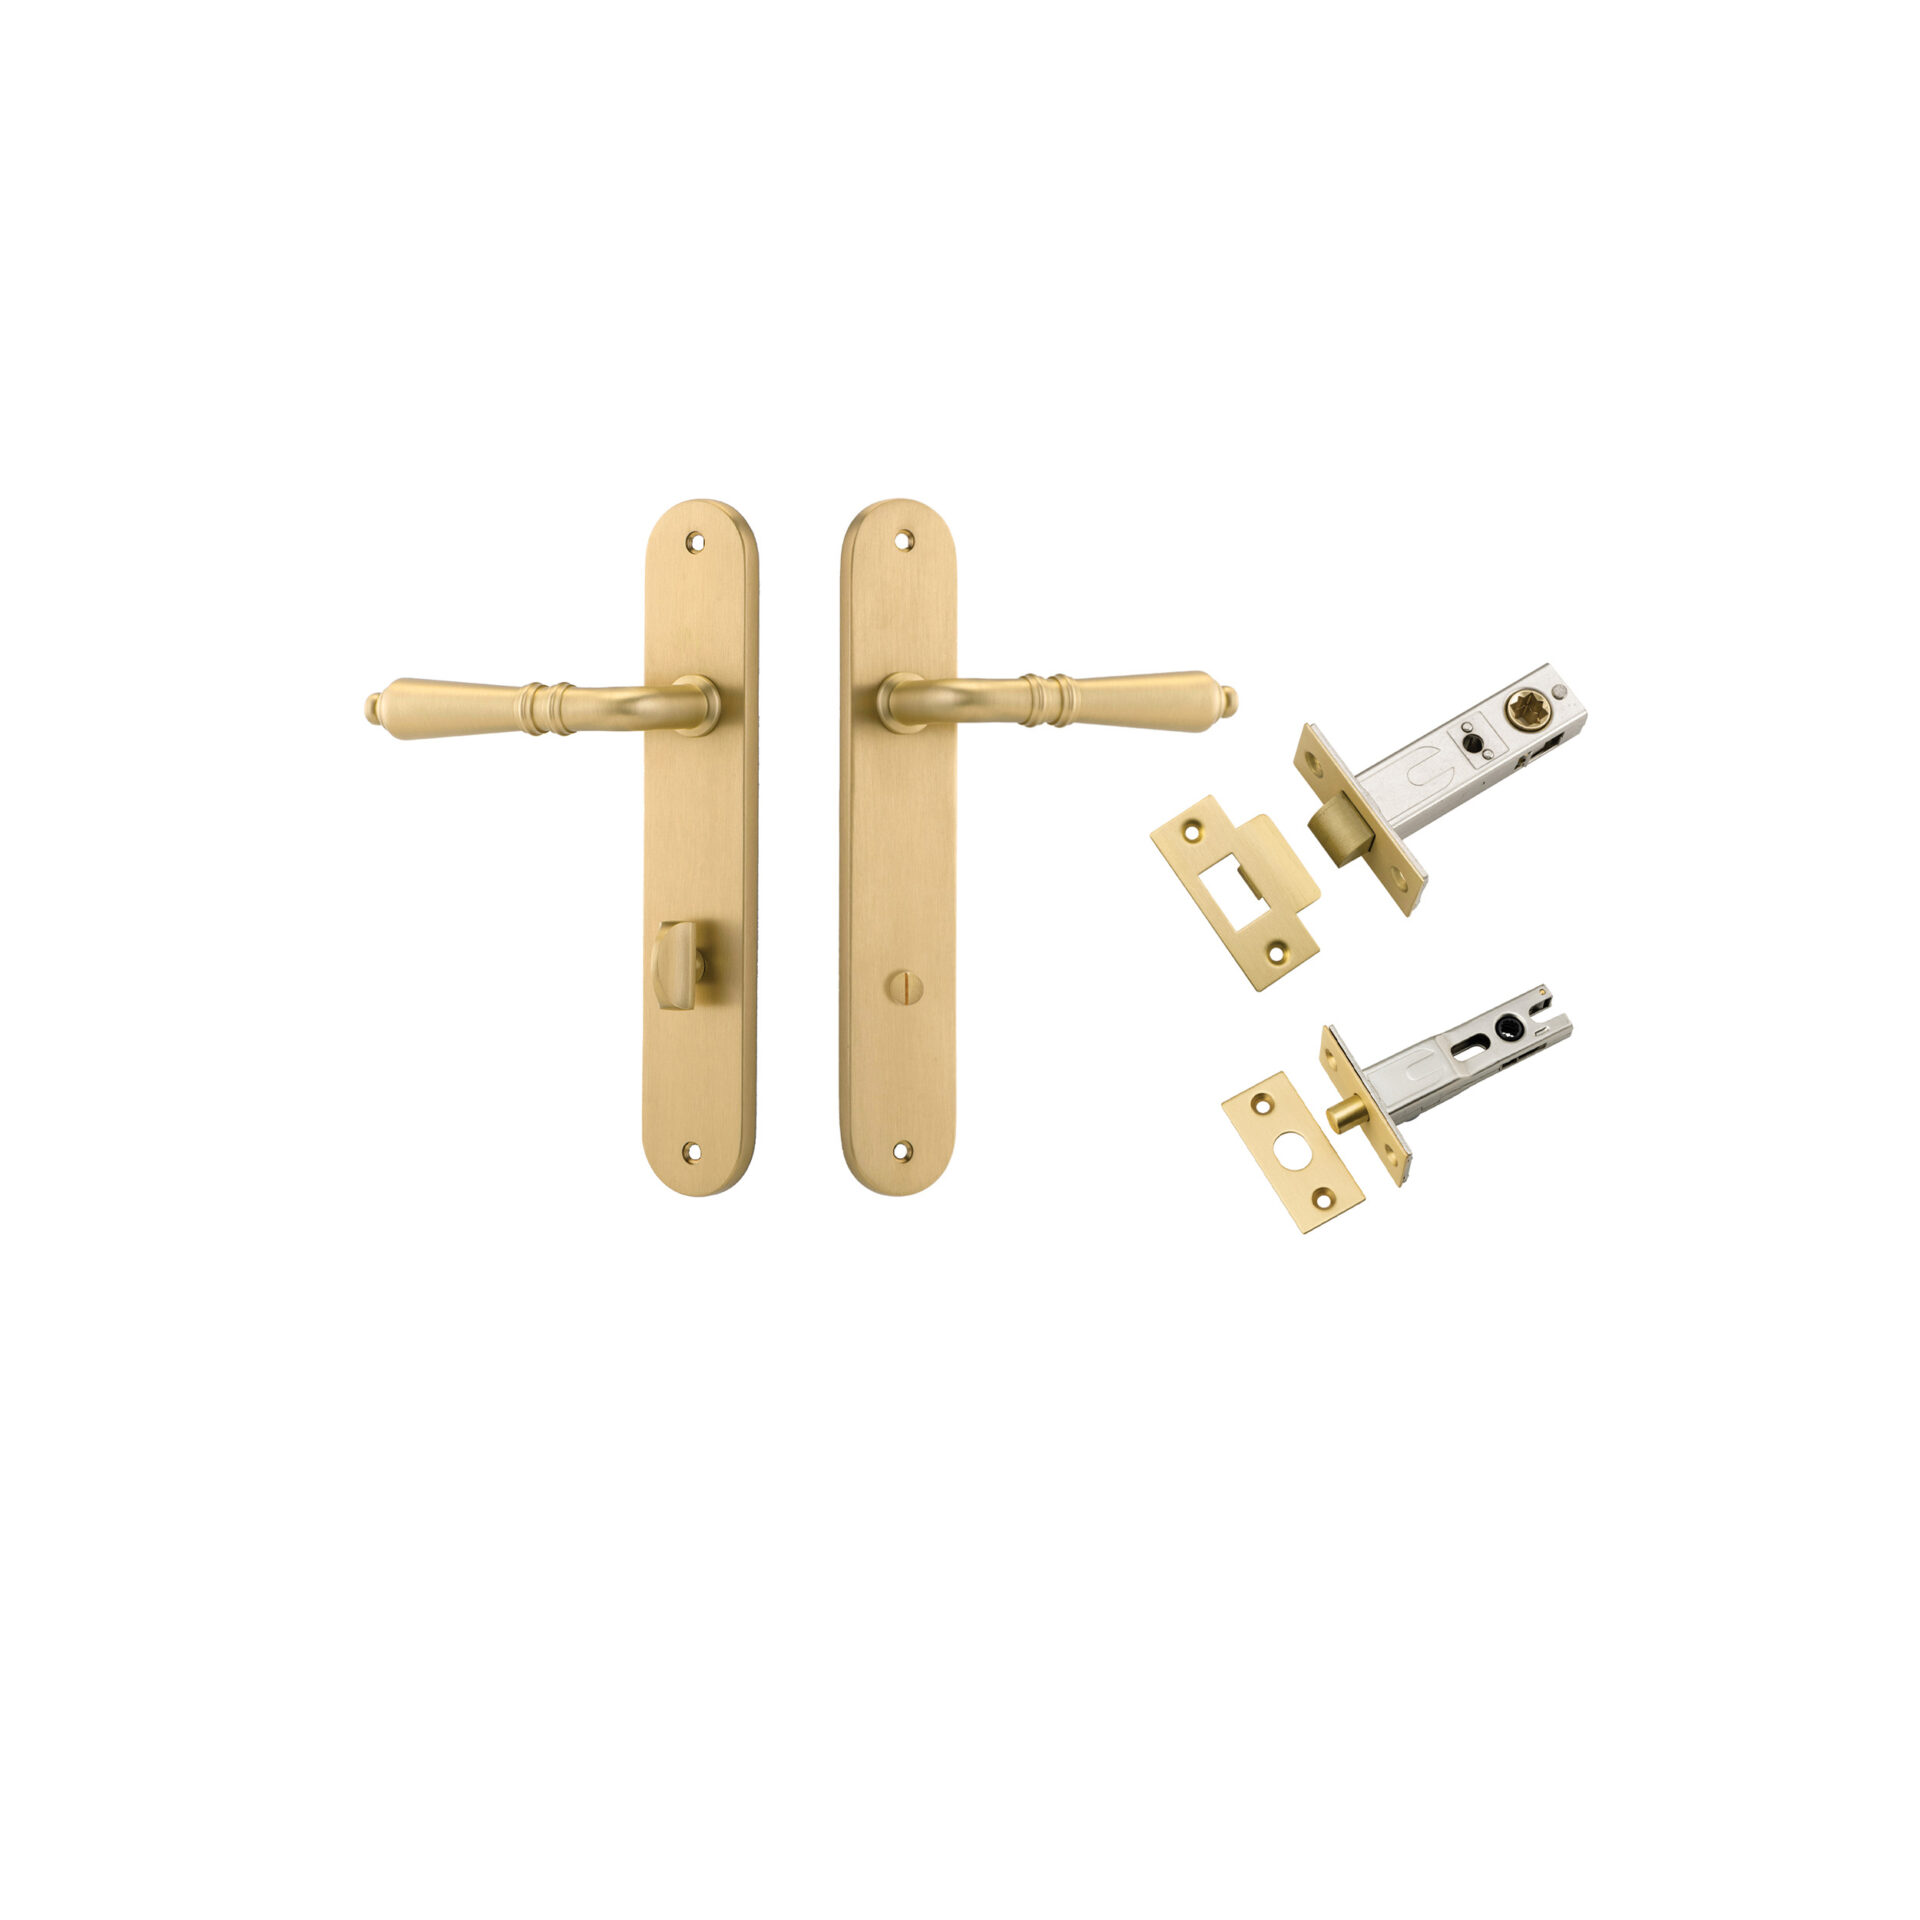 16224KPRIV60 - Sarlat Lever - Oval Backplate Privacy Kit with Privacy Turn - Brushed Gold PVD - Privacy